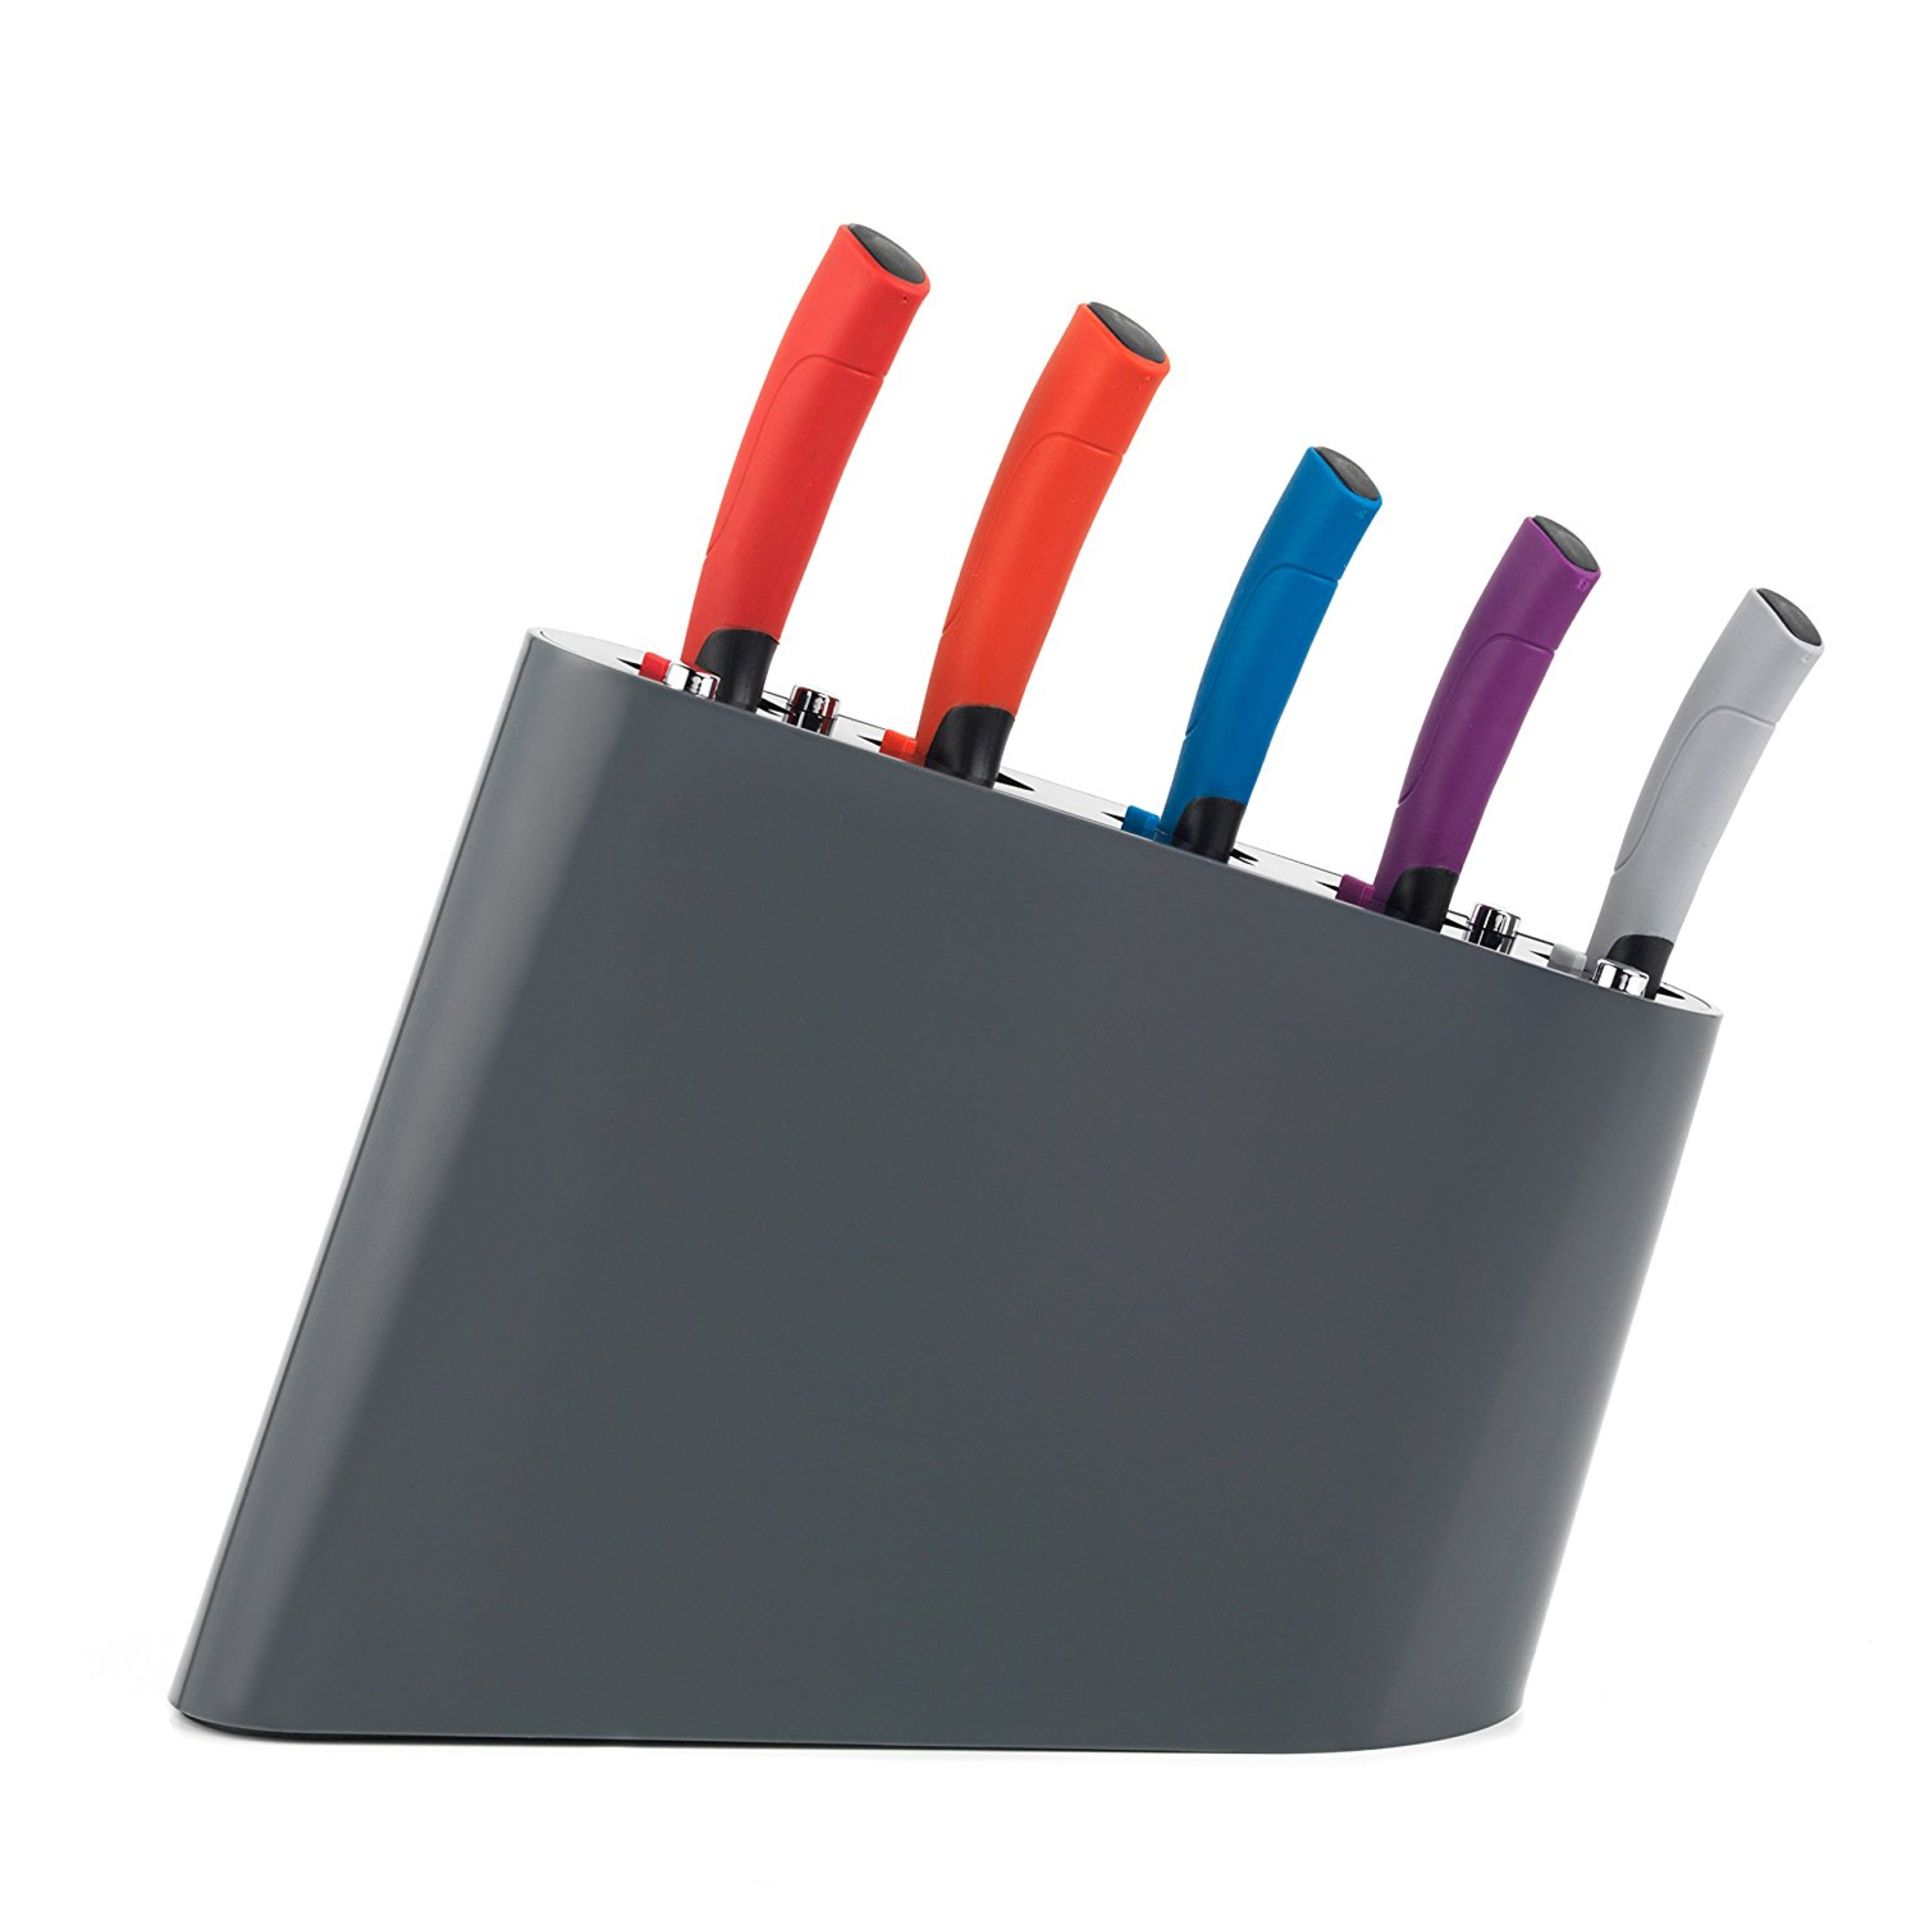 V Brand New Progress 5 Piece Smart Knife Block With Multi Coloured Handles - Image 2 of 4